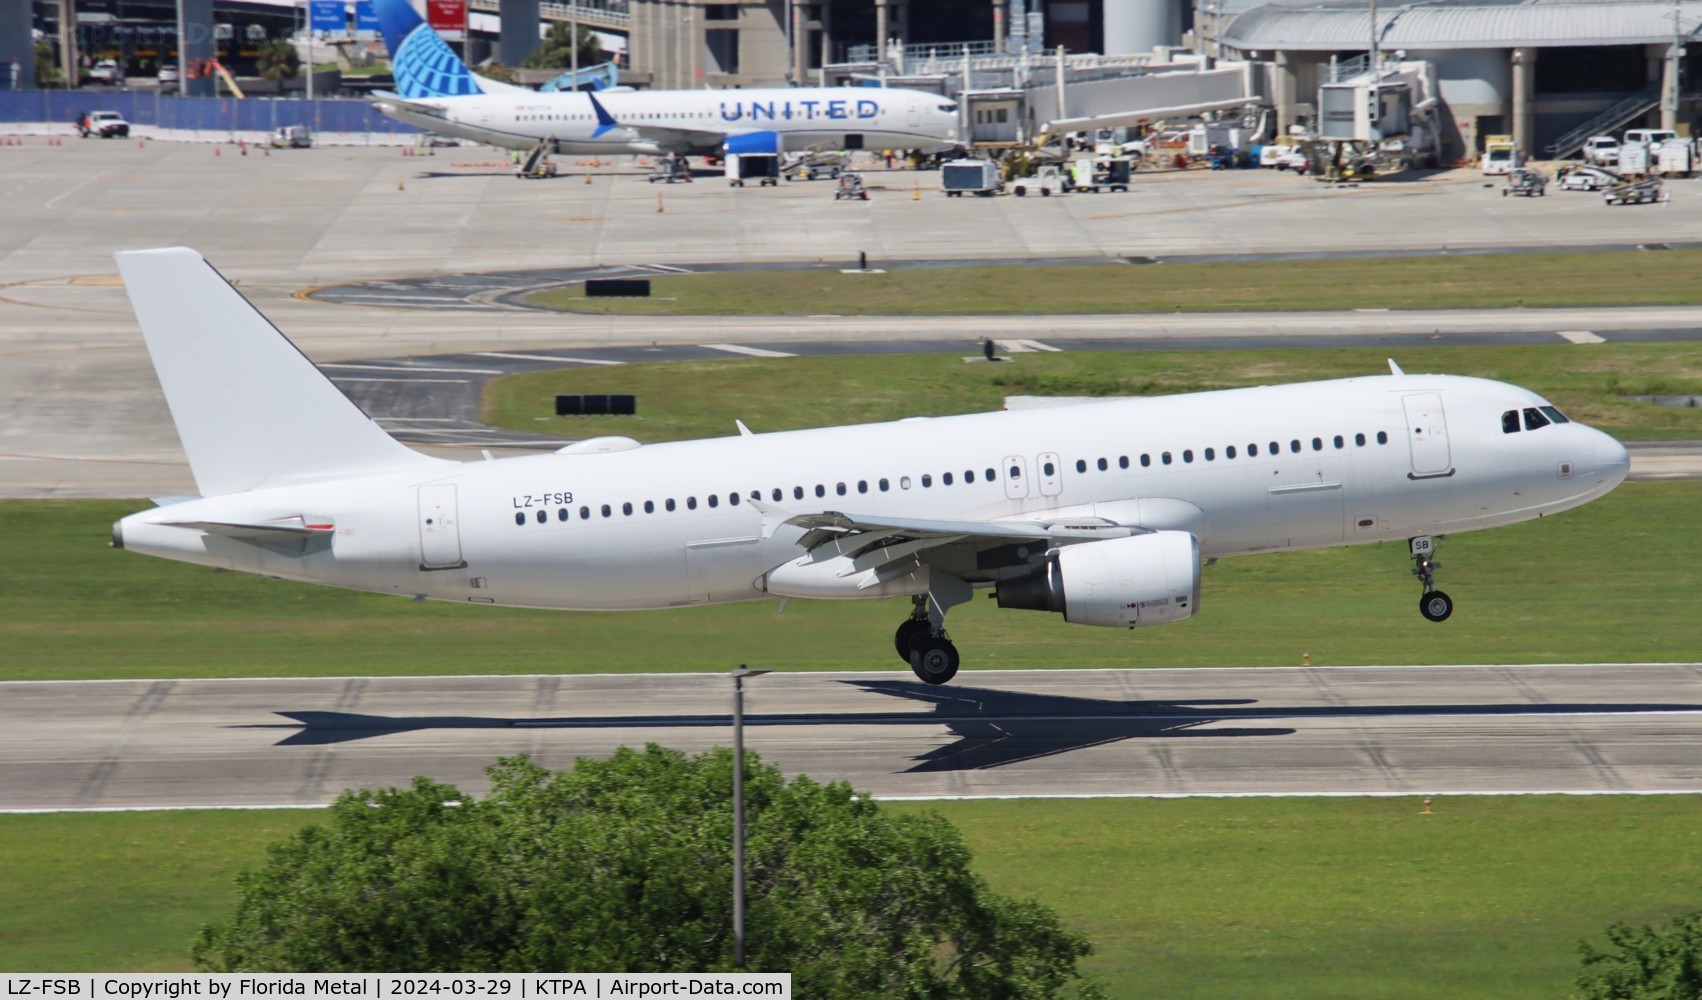 LZ-FSB, 2007 Airbus A320-214 C/N 3055, Fly to Sky A320 zx being leased by World Atlantic for HAV-TPA from Havana Cuba